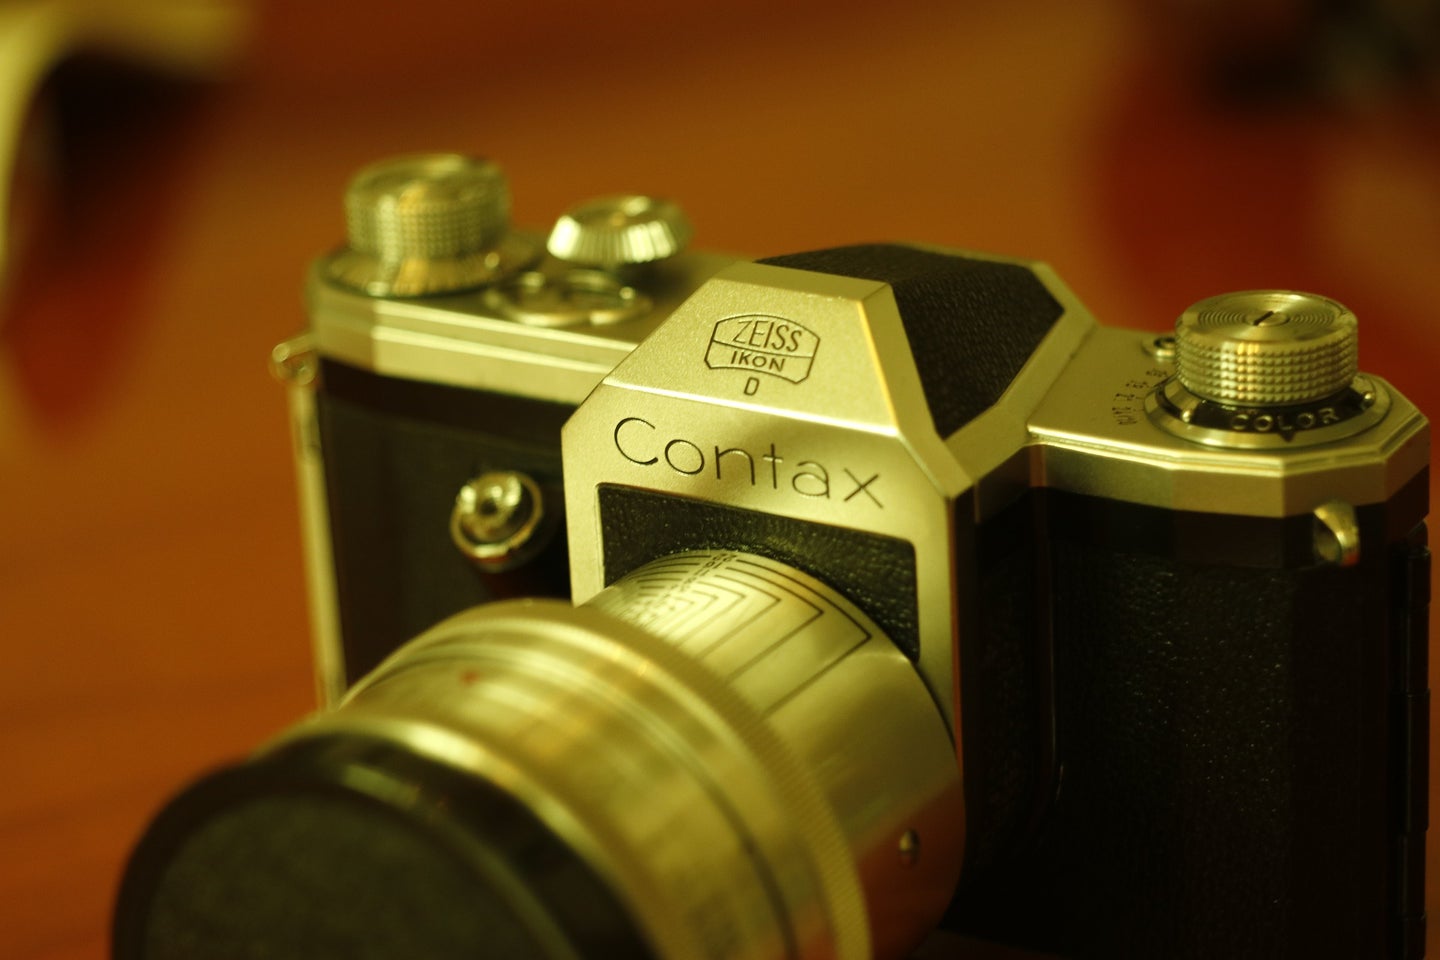 Vintage Contax camera on wooden table